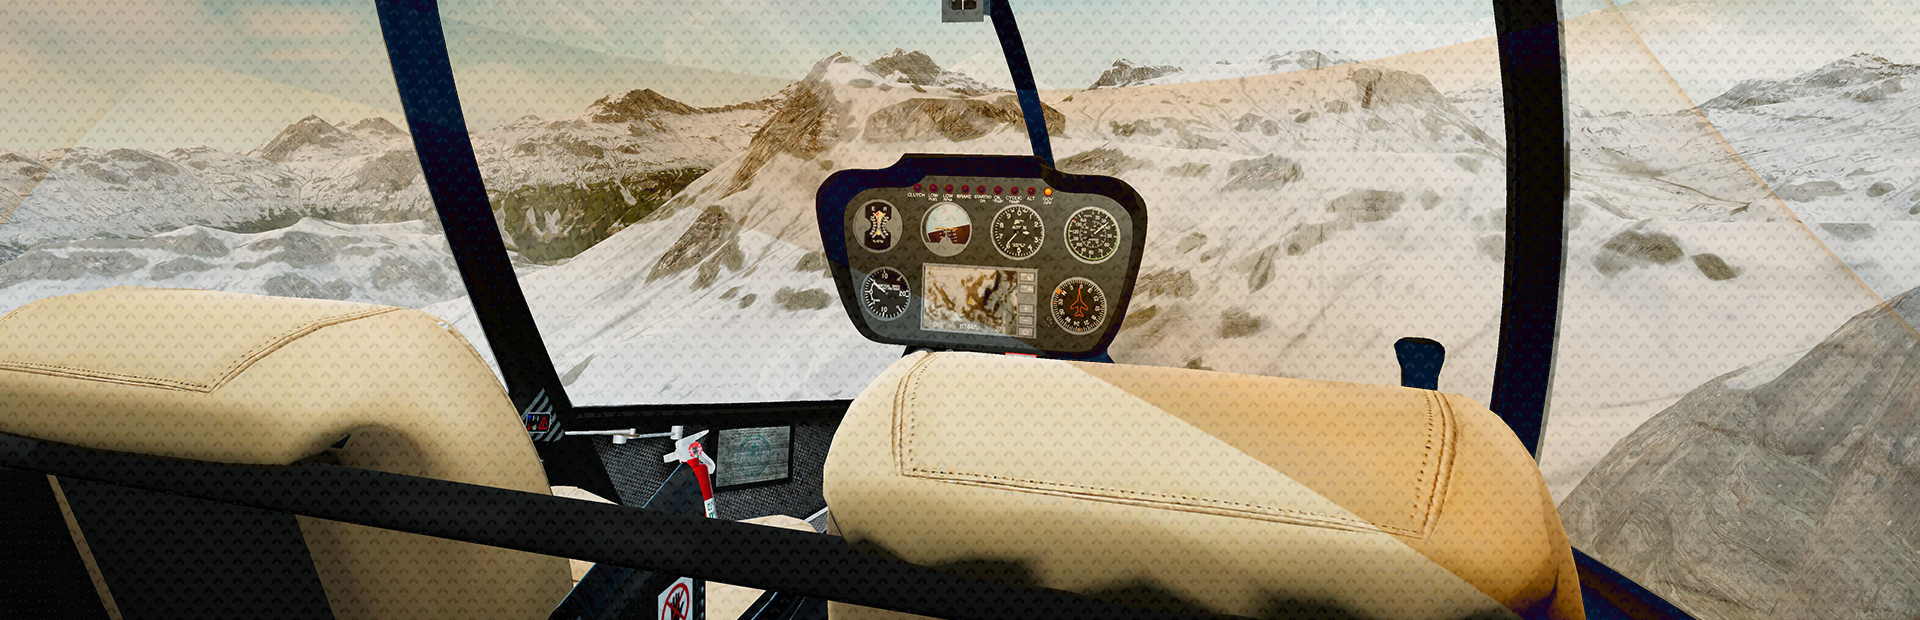 Helicopter Simulator VR - Rescue Missions Online